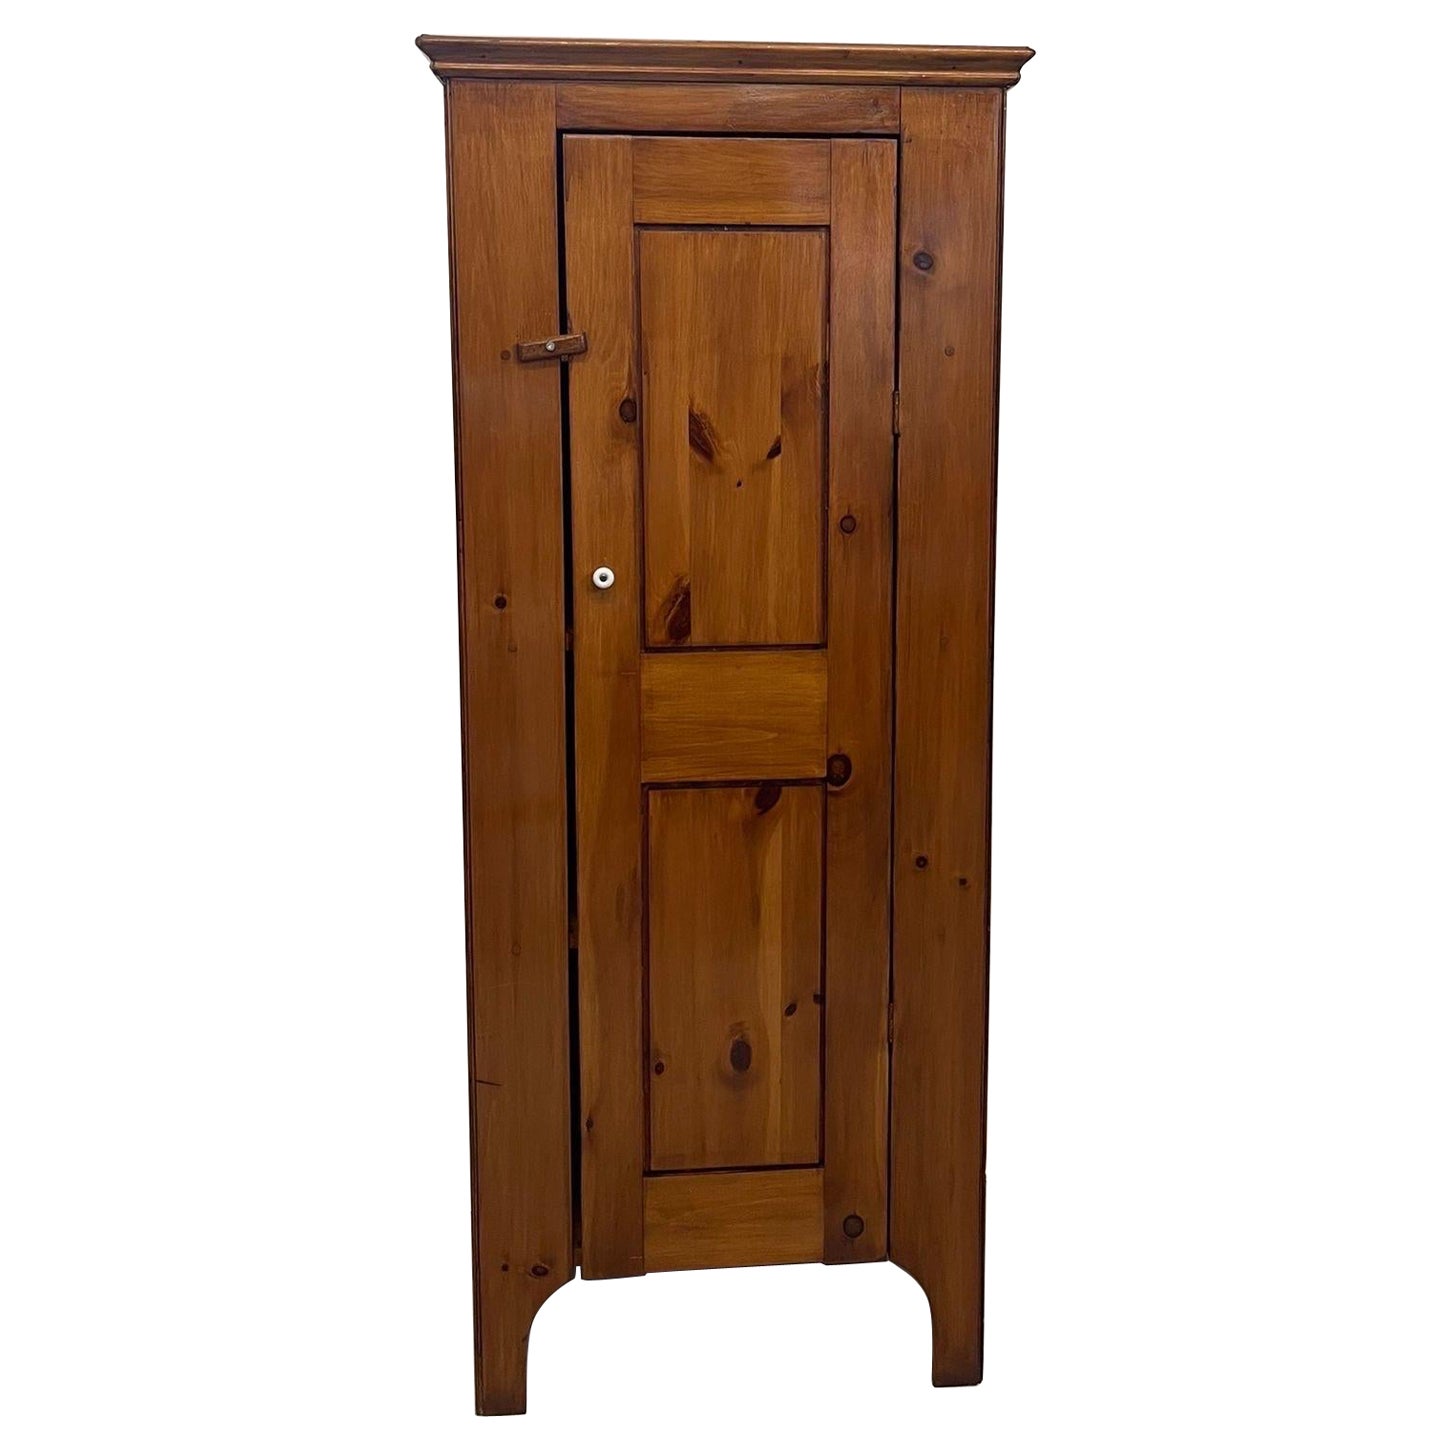 Vintage Tall Wooden Cupboard Cabinet. For Sale